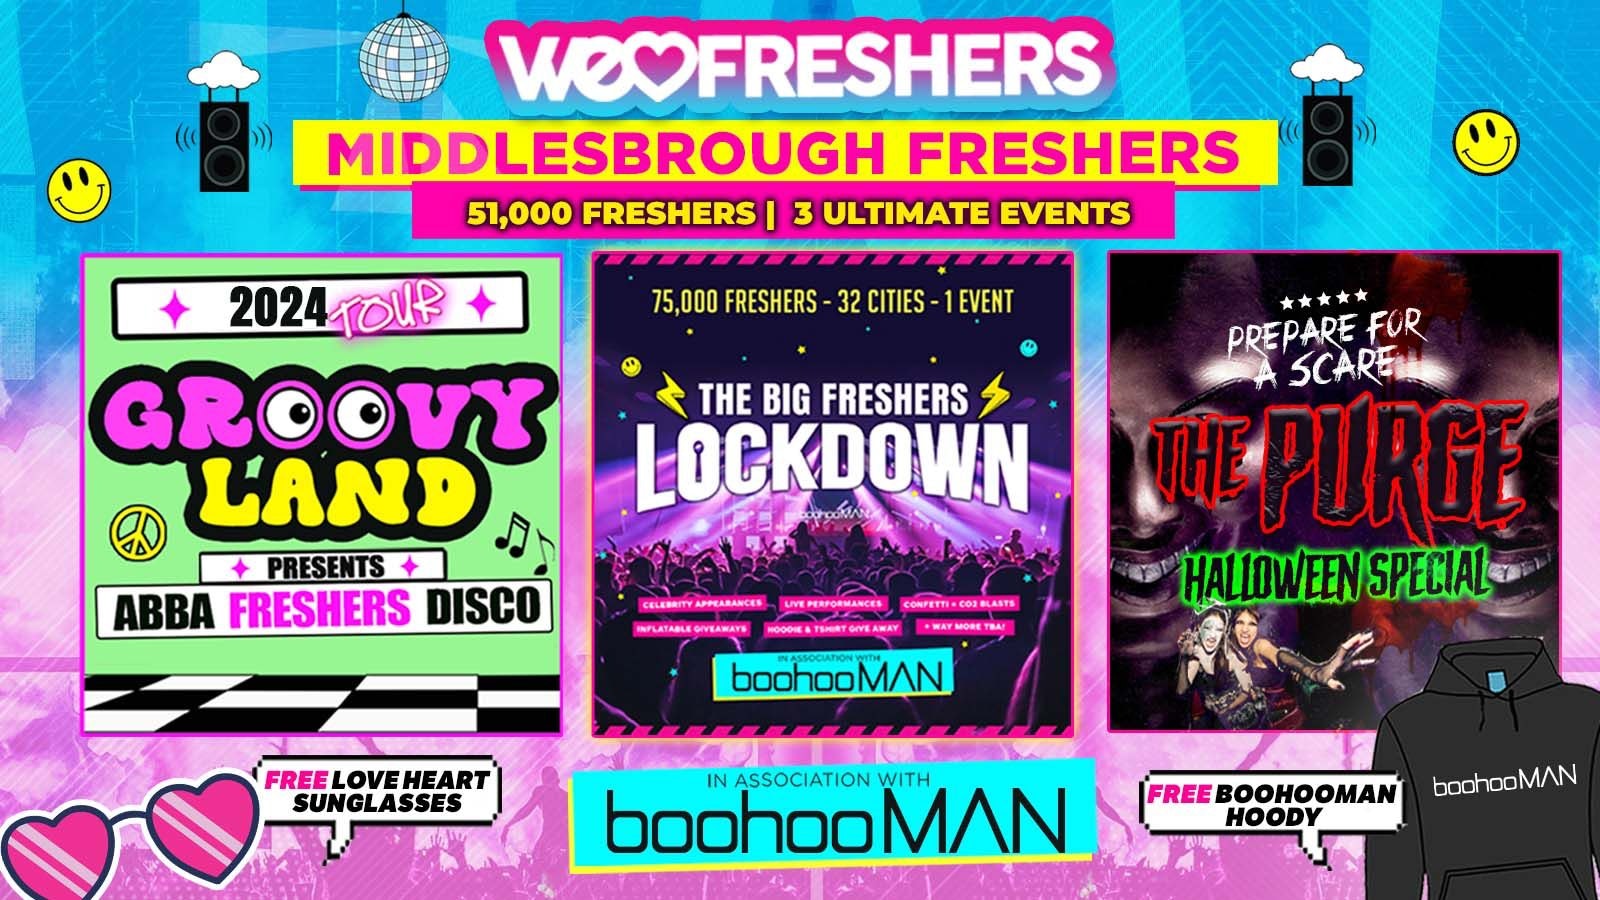 WE LOVE MIDDLESBROUGH FRESHERS 2024 in association with boohooMAN❗3 EVENTS ❗